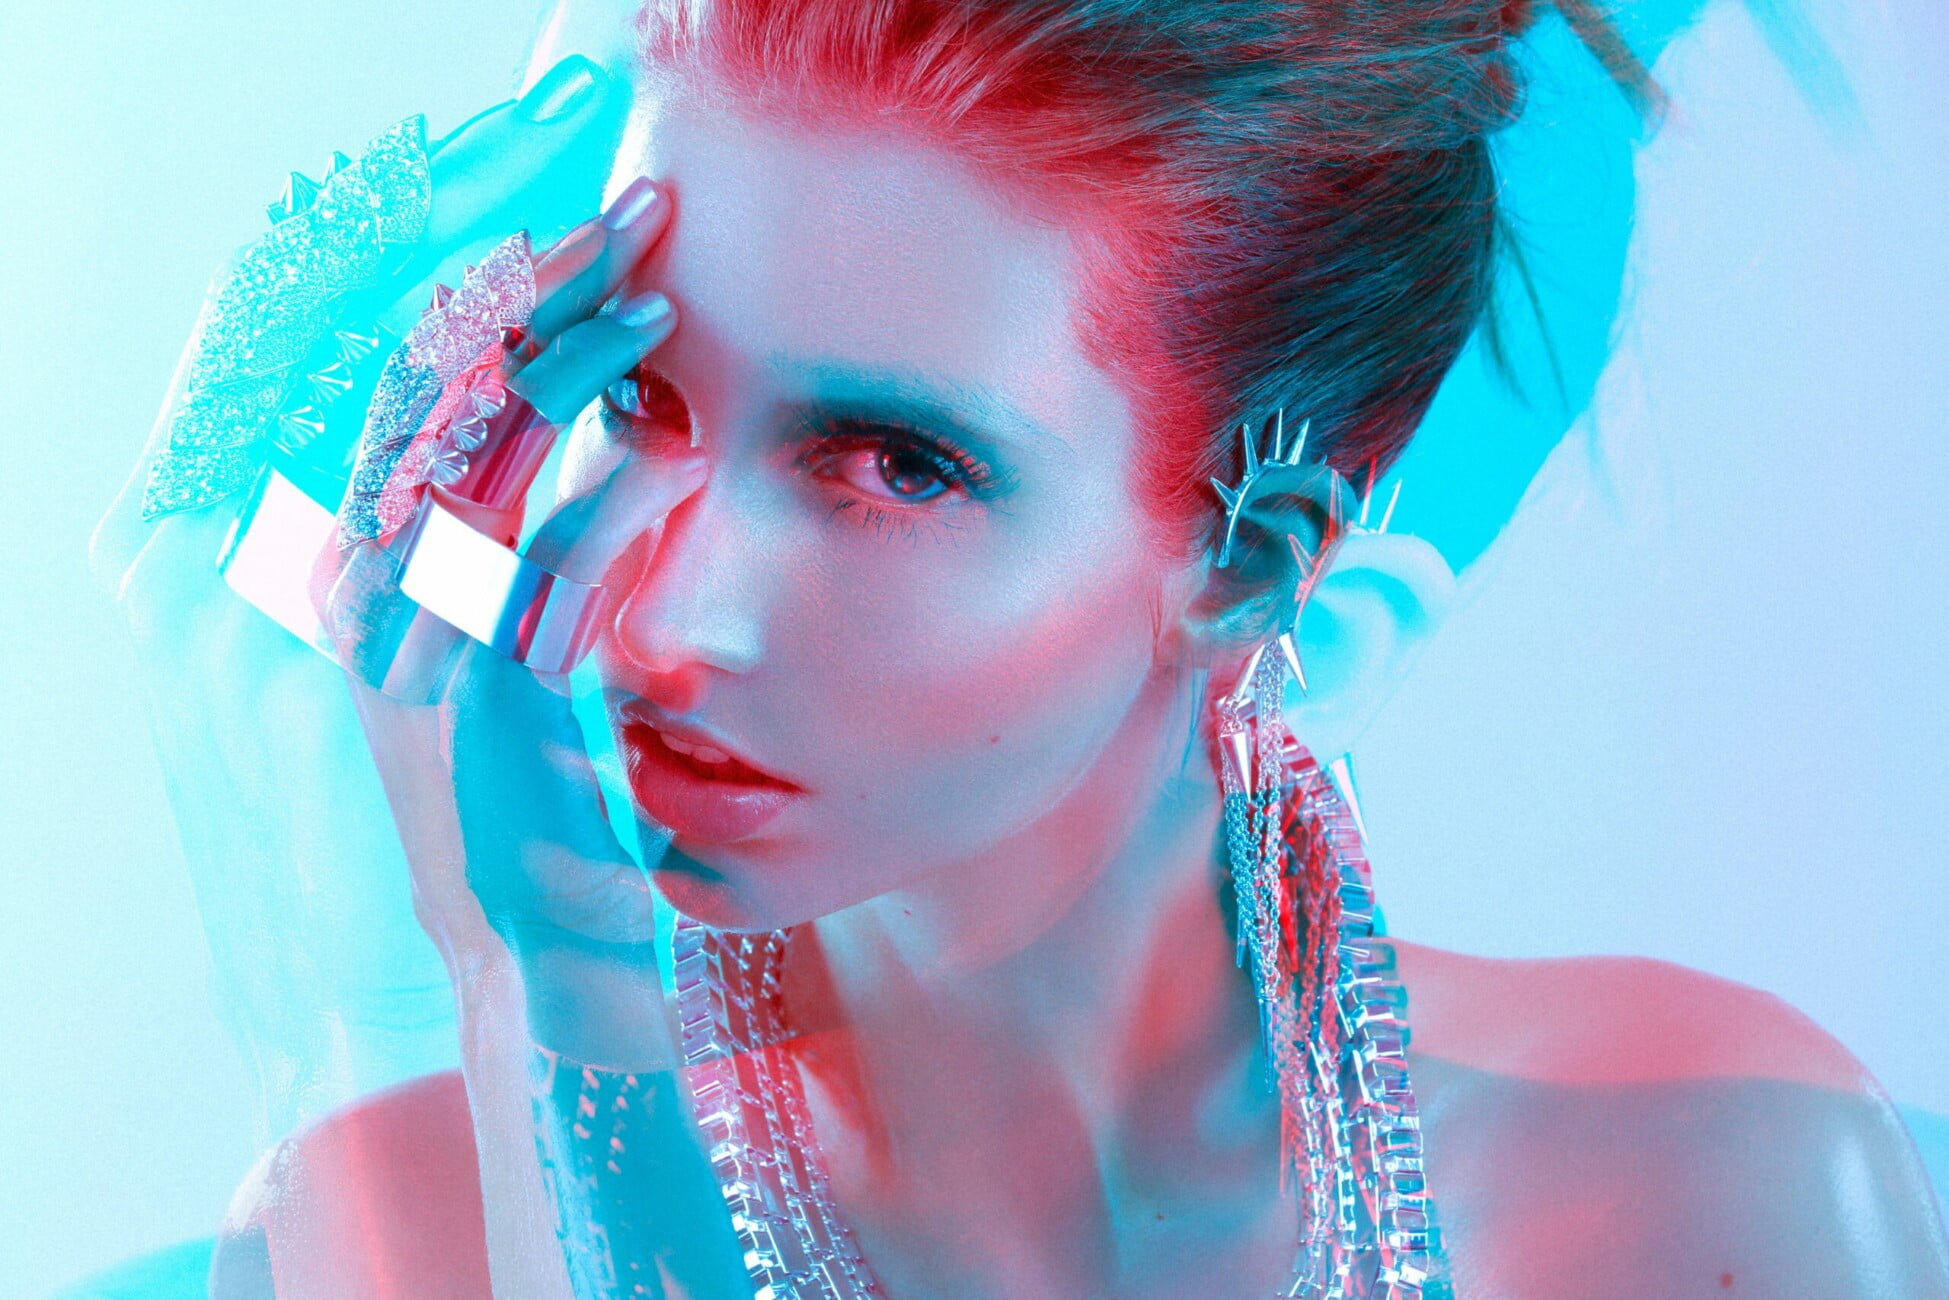 Nude make-up accentuates the beauty of model Adeline Petit with her jewels in an artistic electric blue and red image by photographer Etienne Delorme, featured in Faust Magazine.